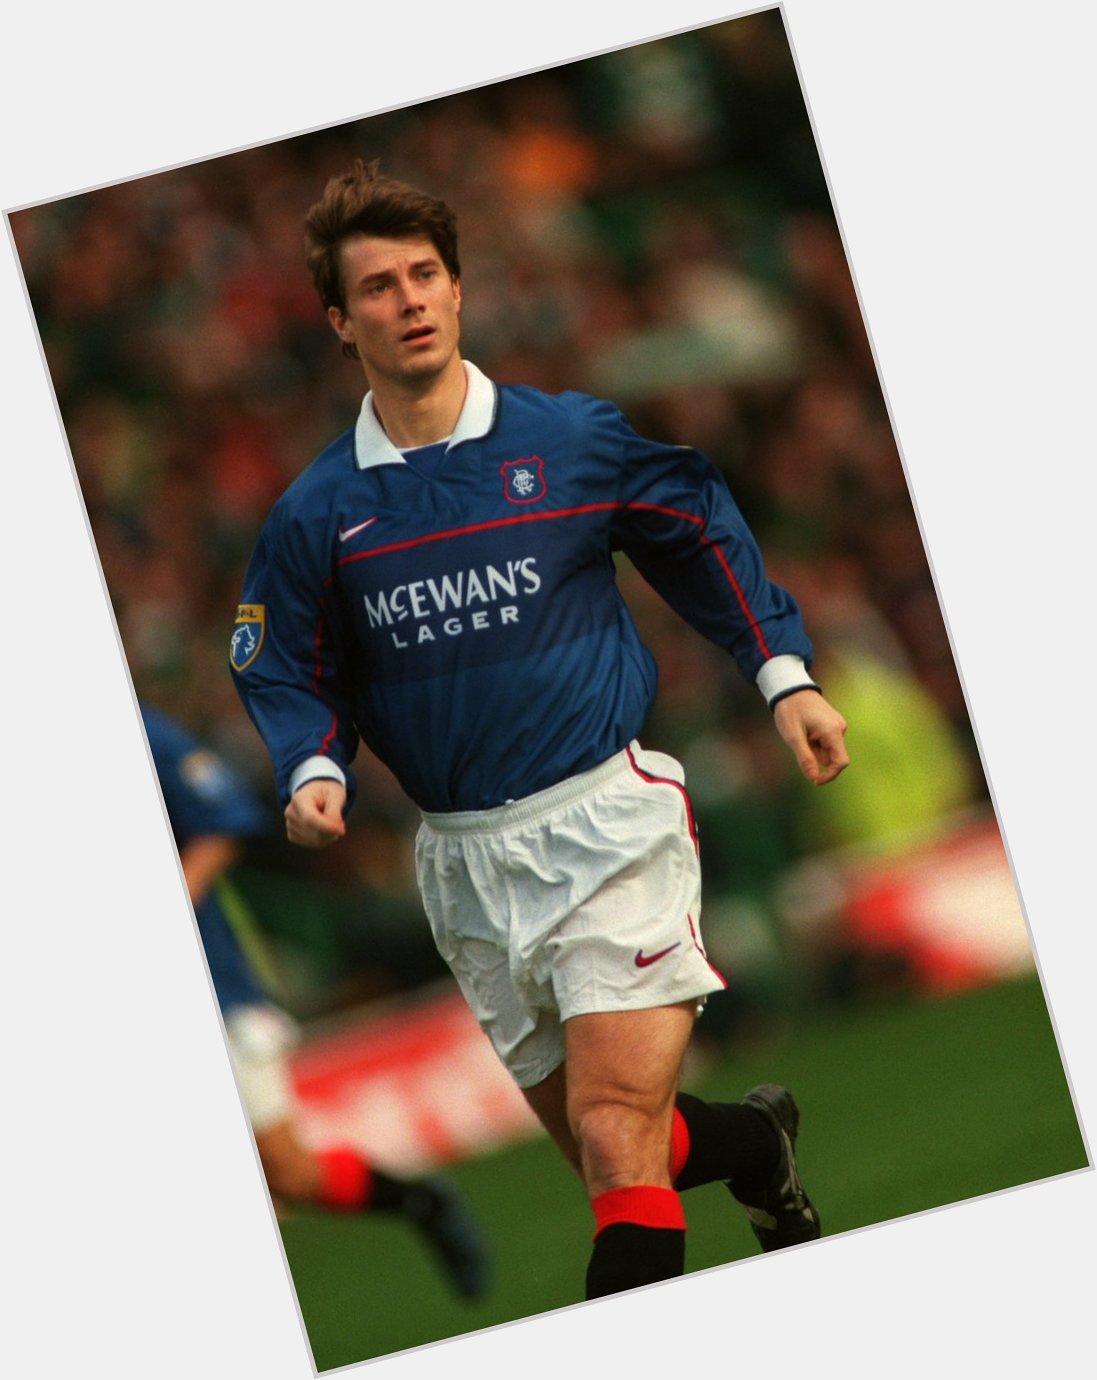 Happy birthday to brian Laudrup I know cause we share a birthday 